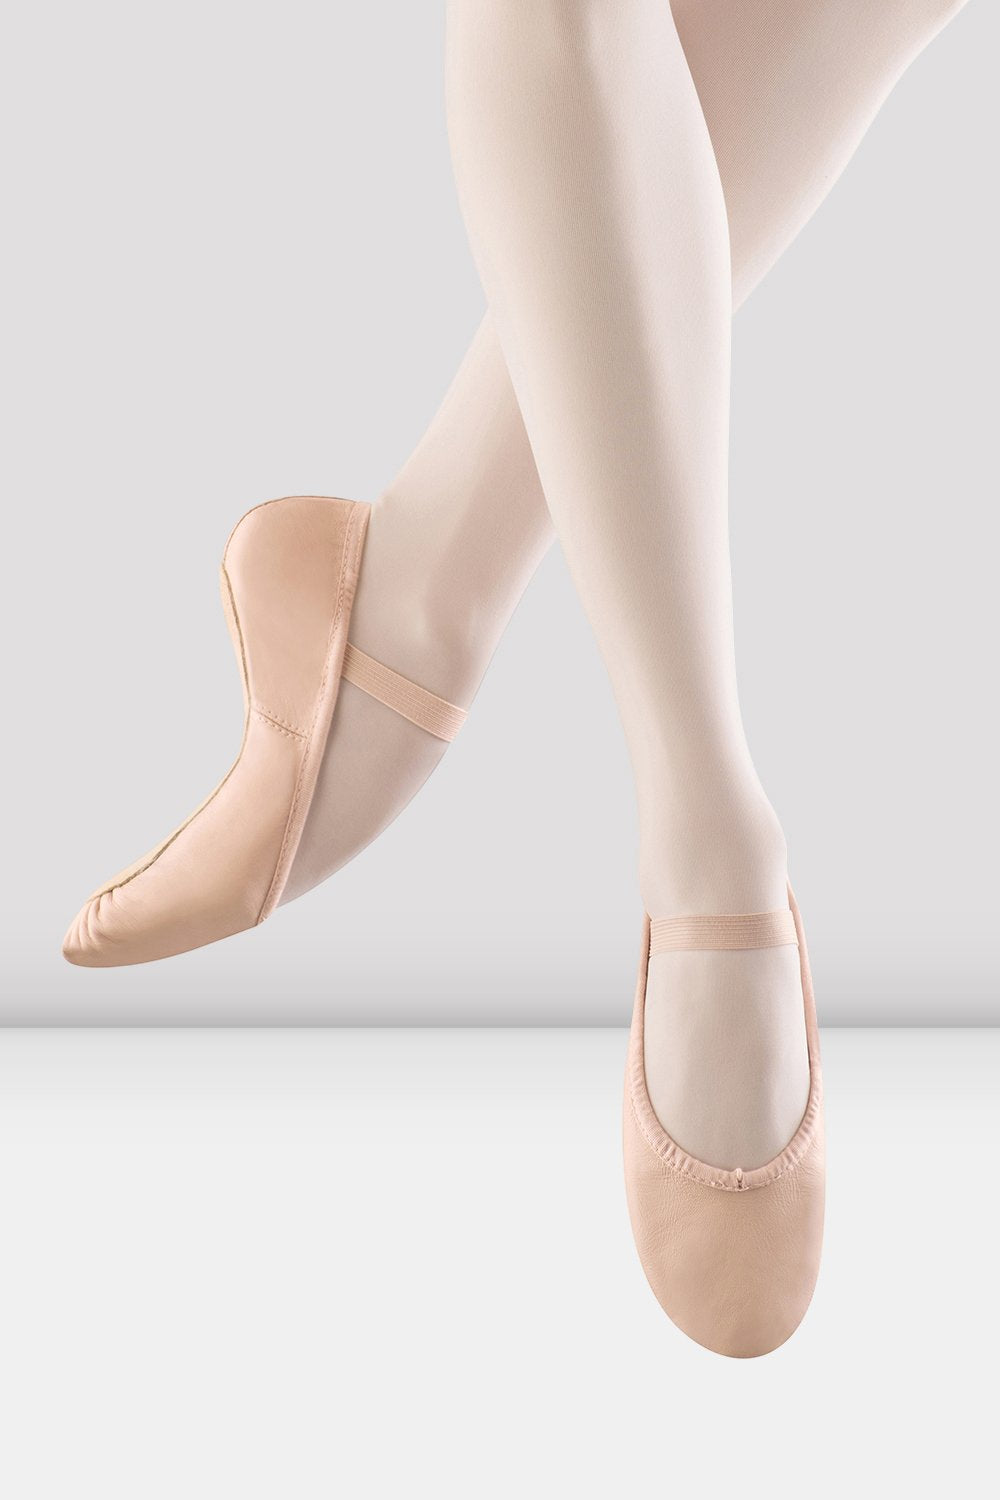 Ballerina Tights in Pink or Black Ballet Shoes for Baby to Little